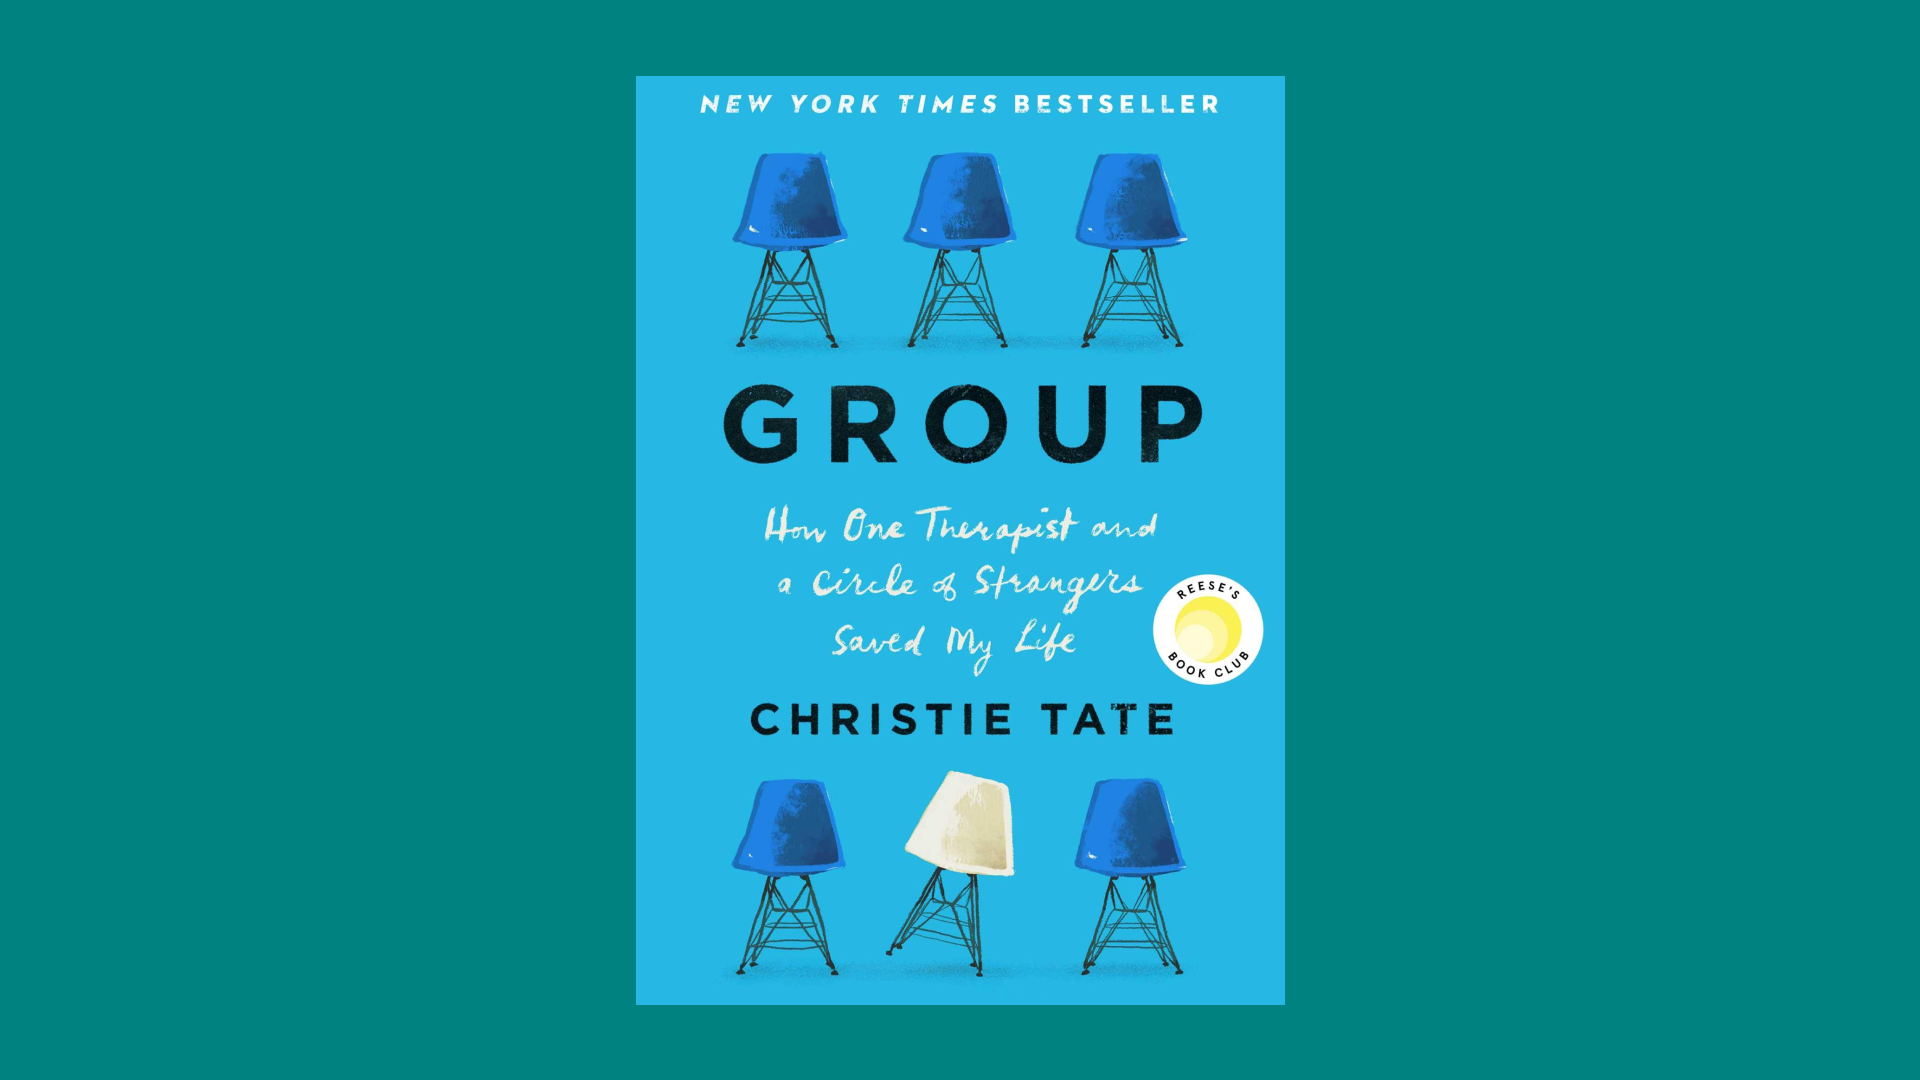 “Group” by Christie Tate